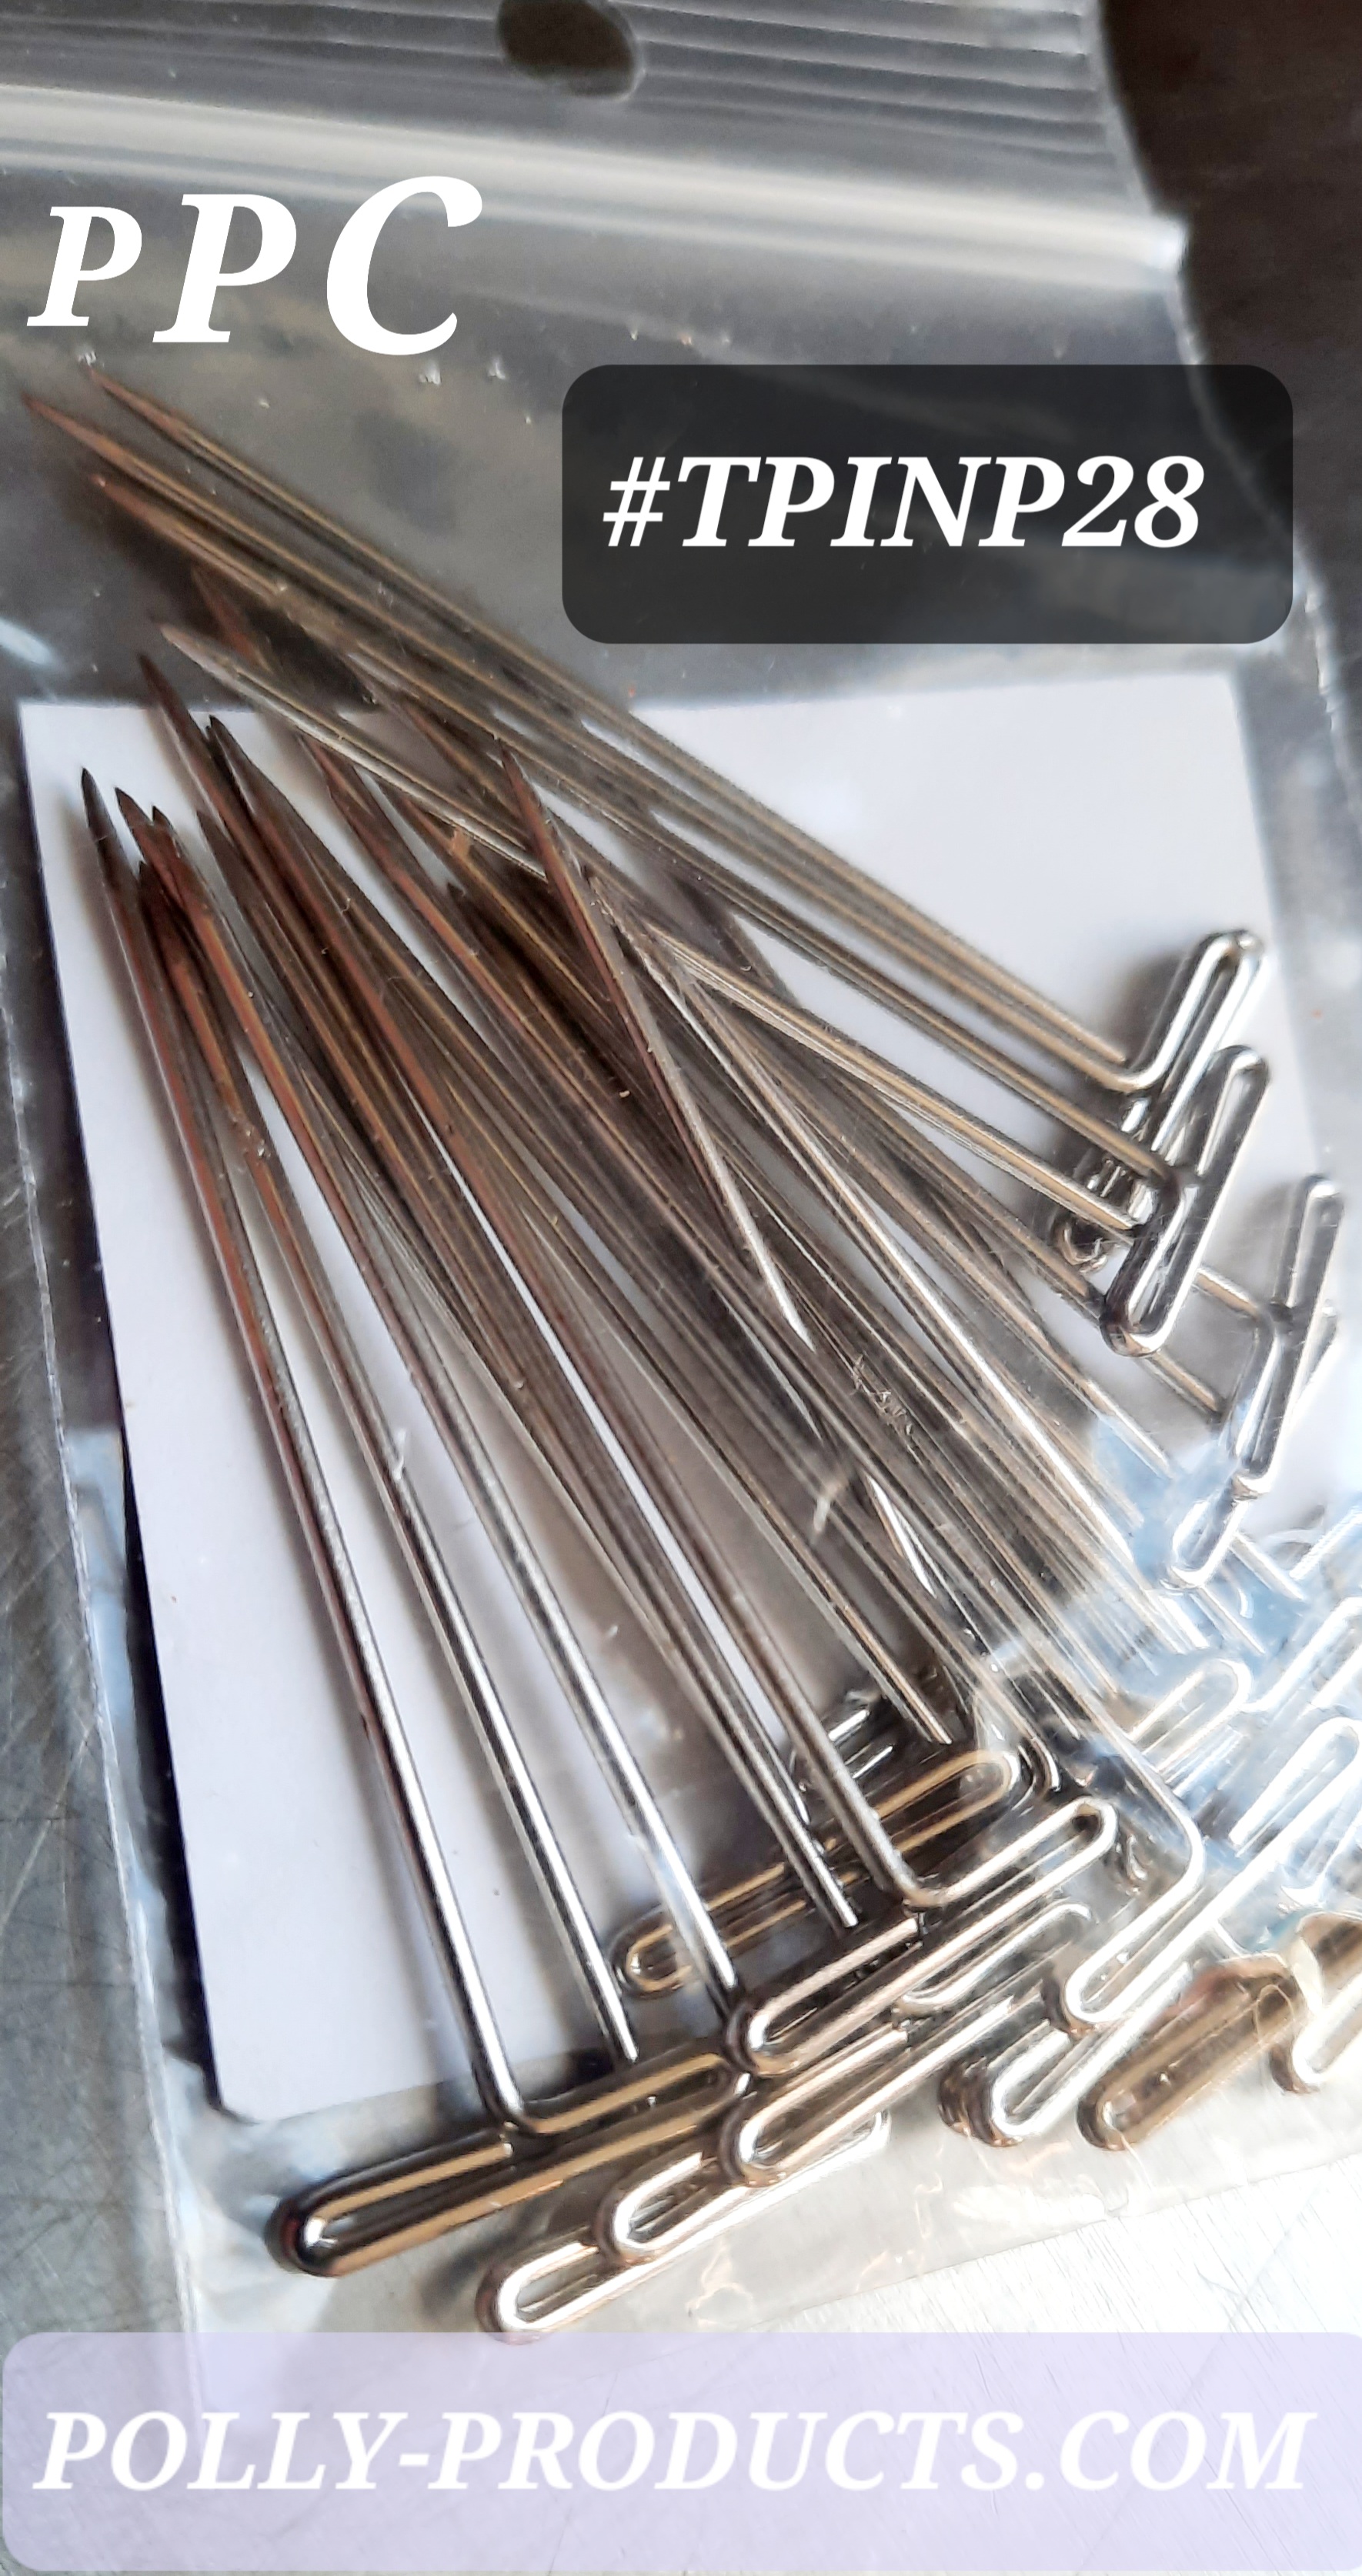 POLLY PRODUCTS T-PIN WIG PINS SUPPLY PINS Made in USA